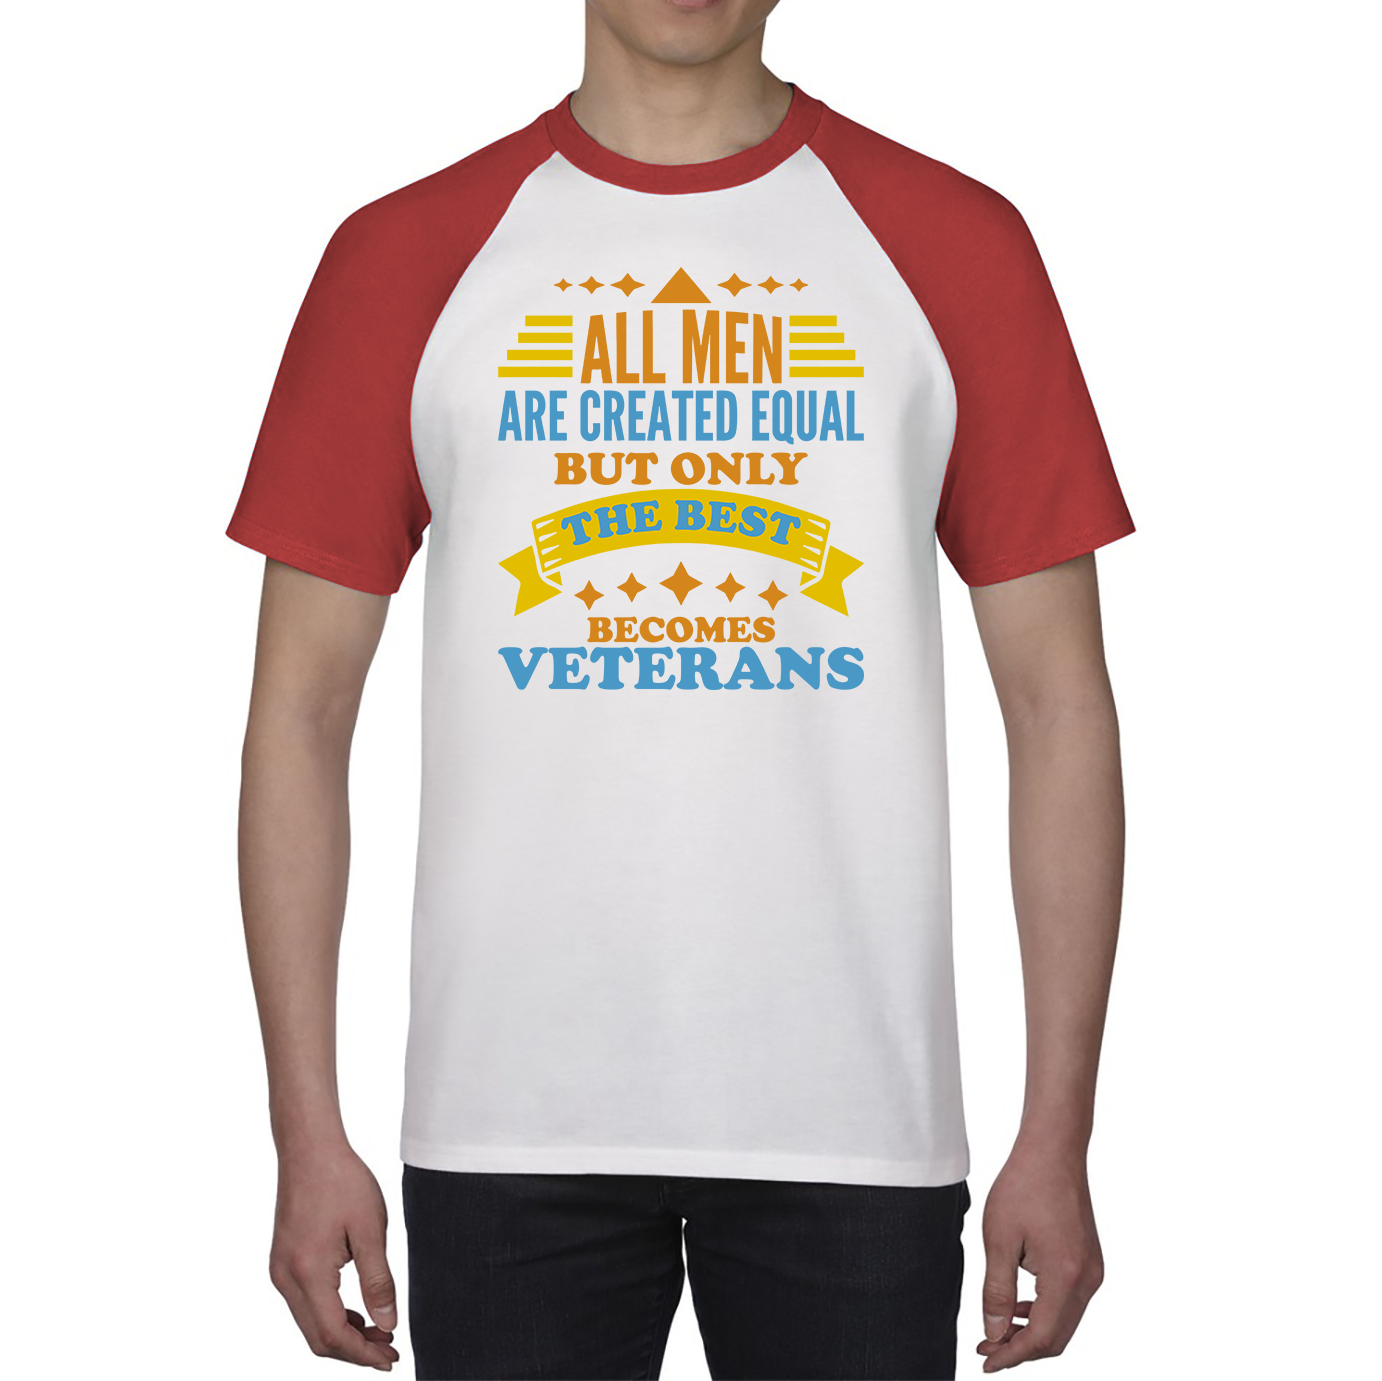 All Men Are Created Equal But Only The Best Becomes Veterans Baseball T Shirt